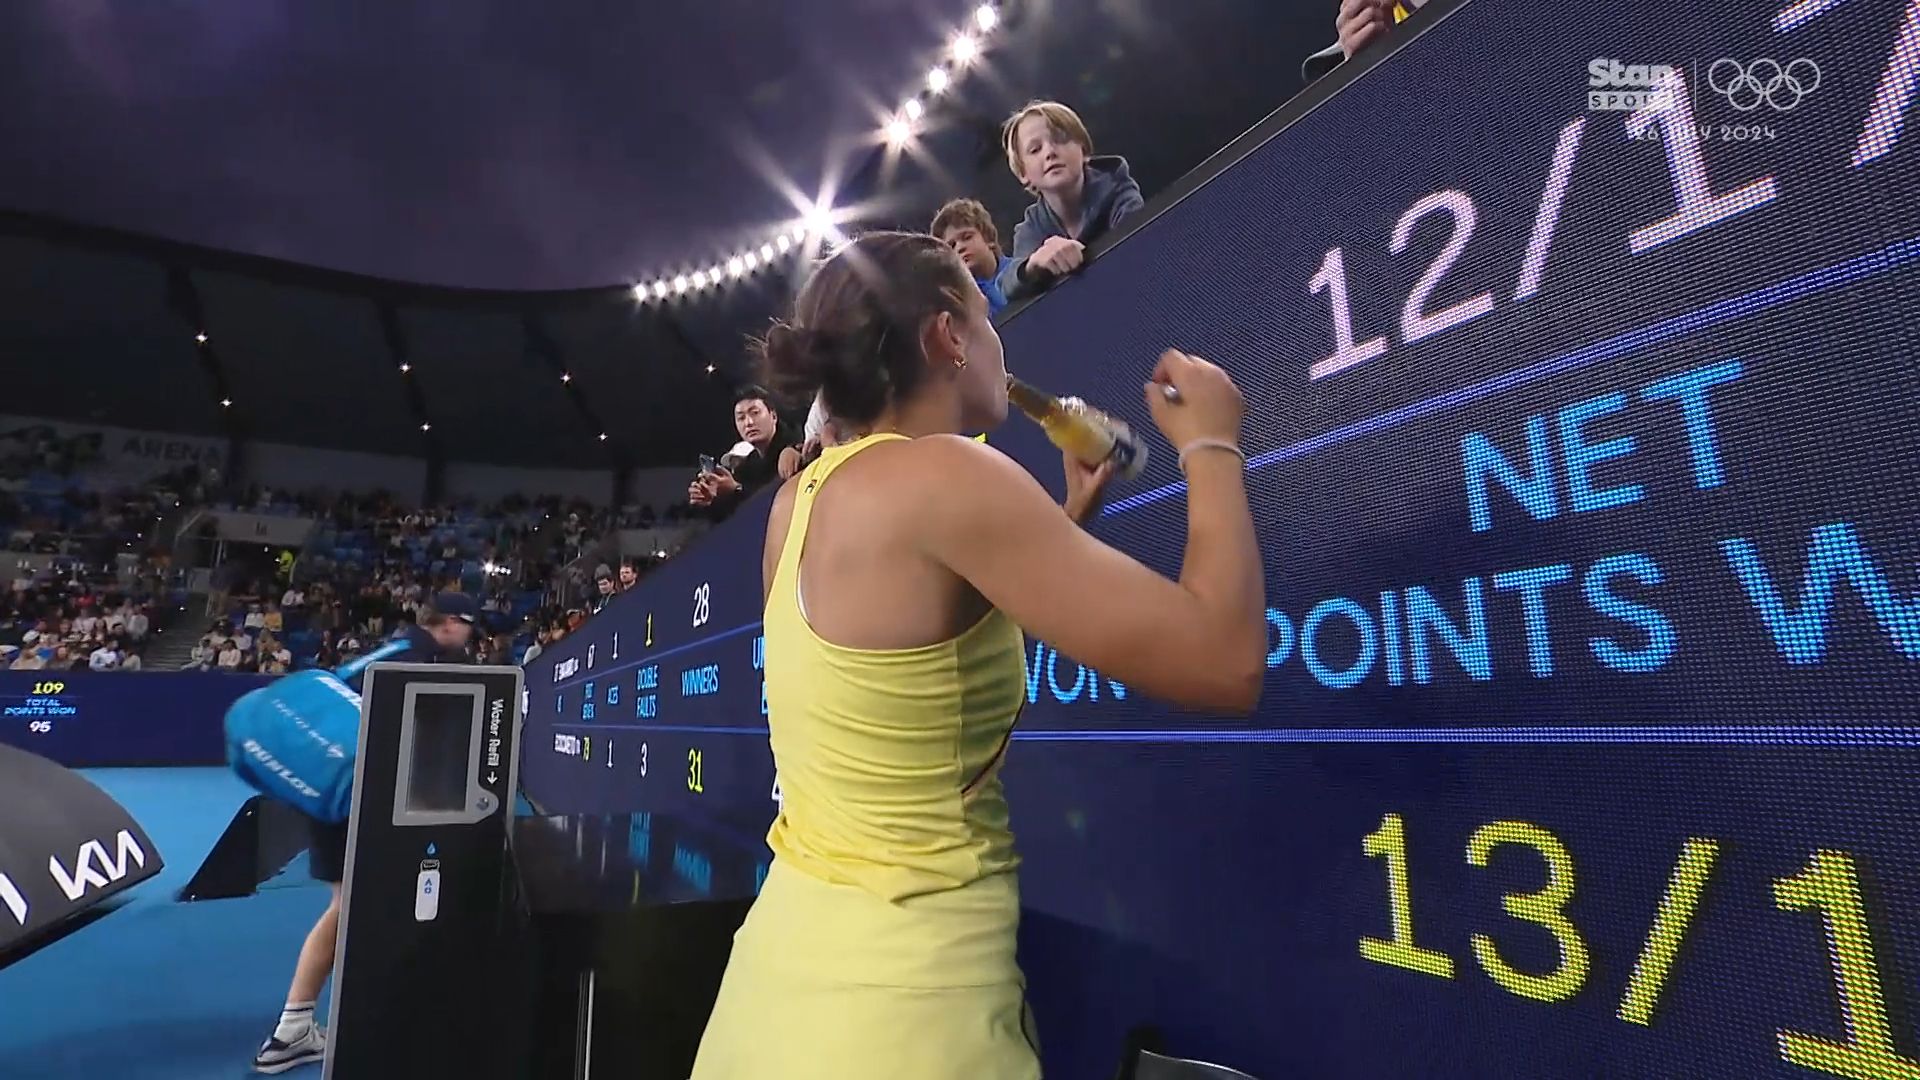 'Respect!': Emma Navarro stuns with cheeky crowd act after breakthrough win